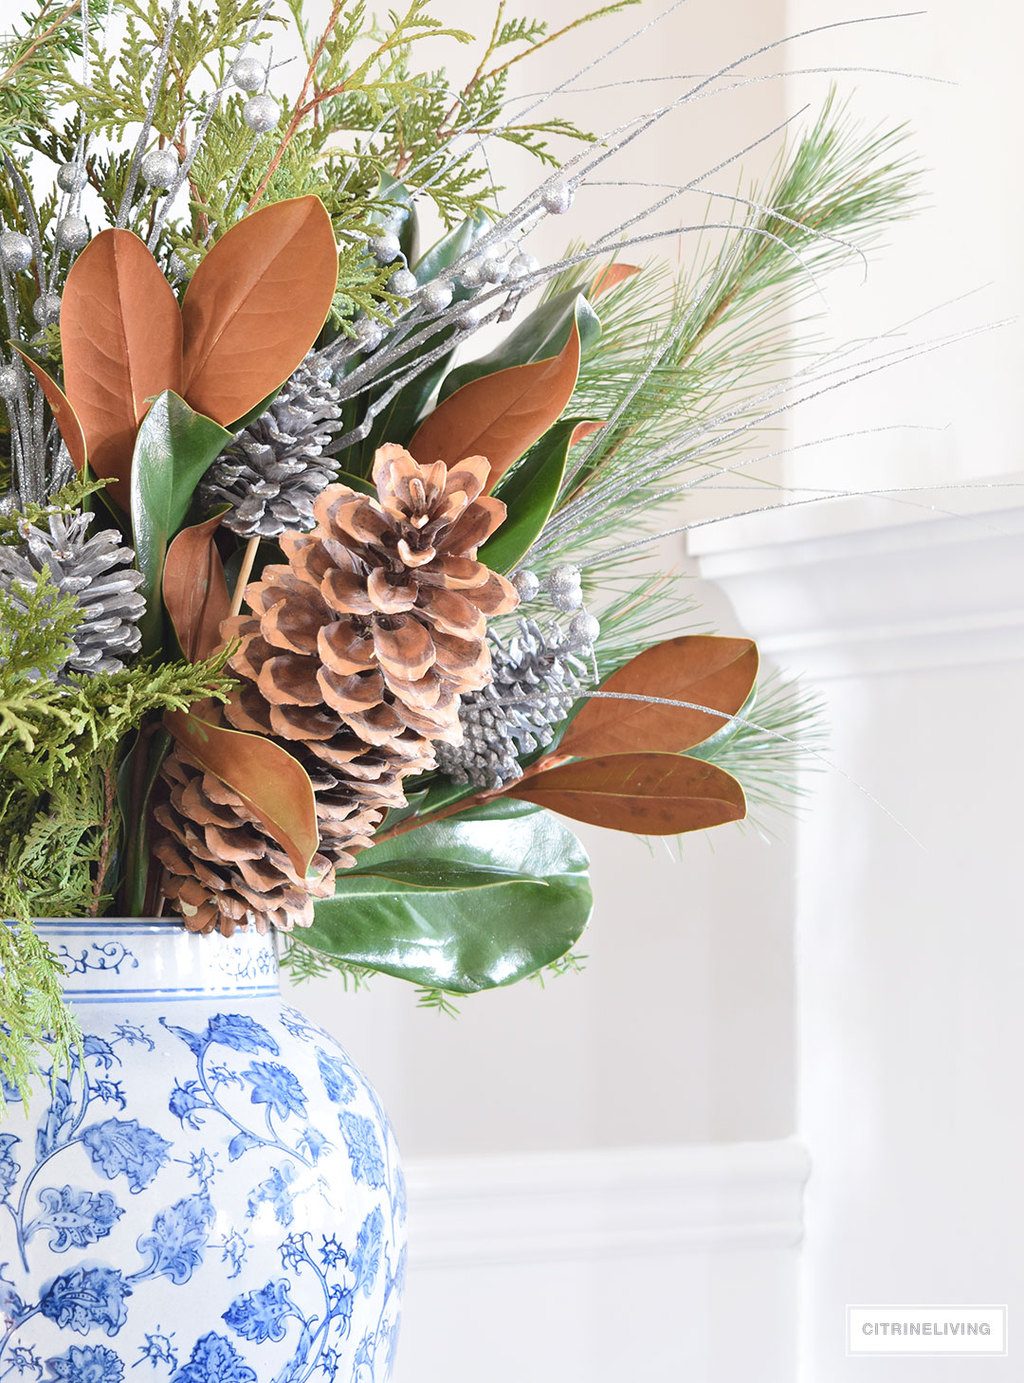 Christmas Home Tour - mixed metallics and blue and white create a chic Holiday theme